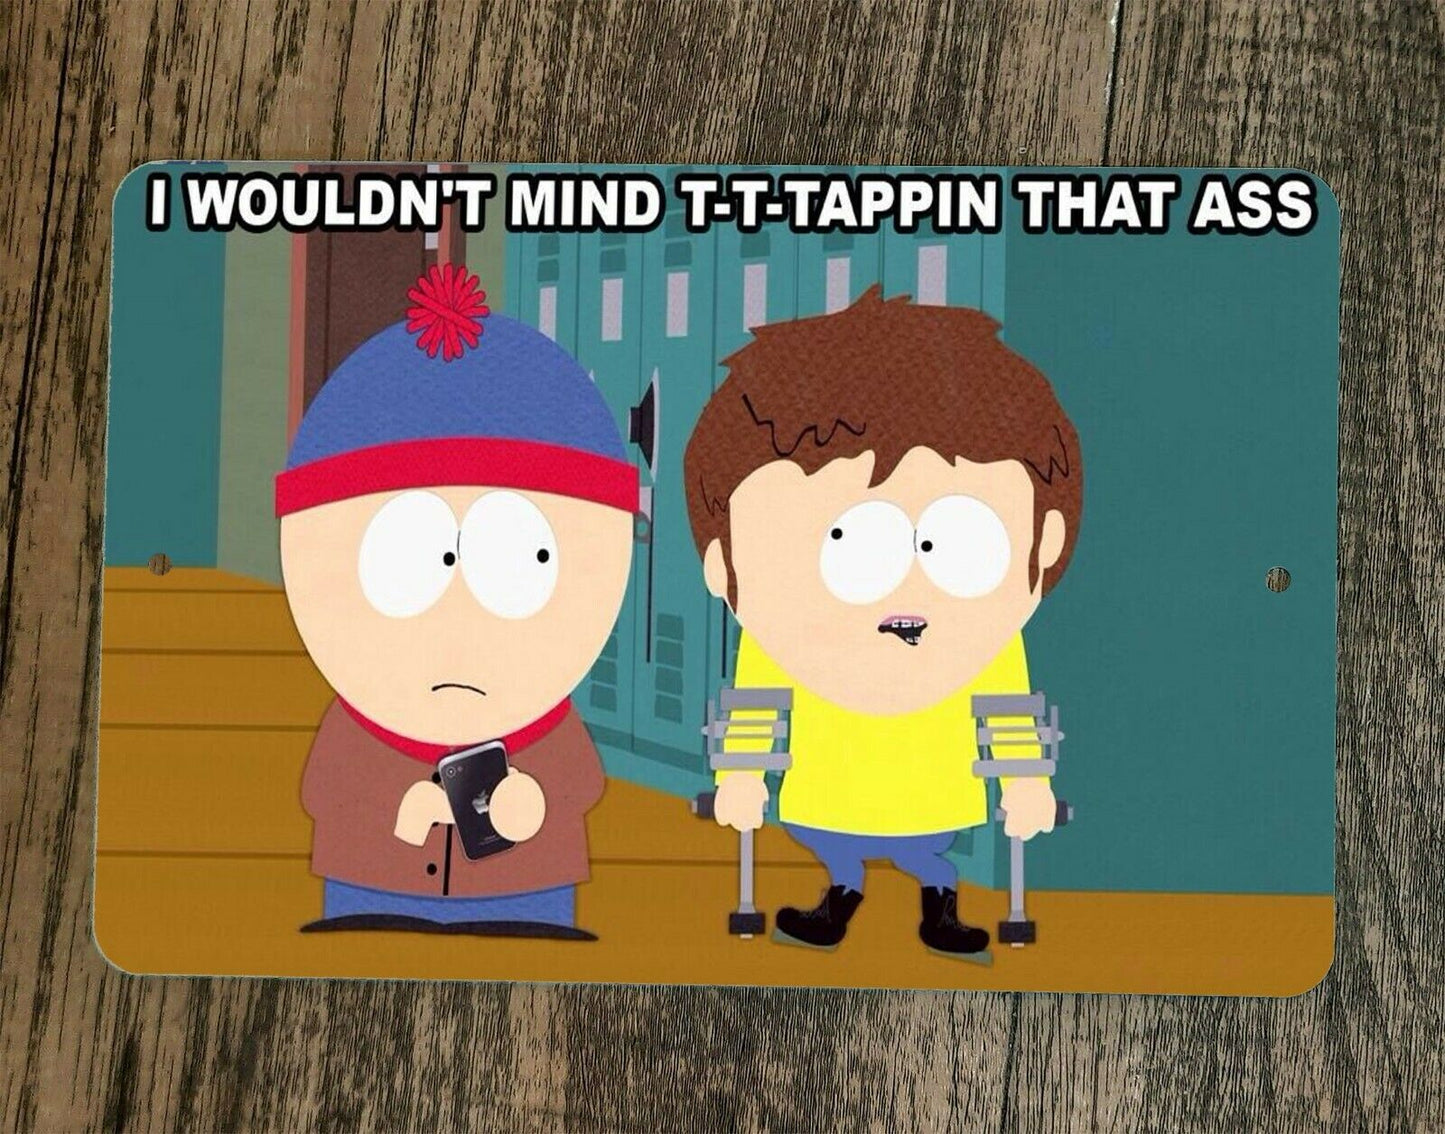 South Park Jimmy I Wouldn't Mind T-T-Tappin That A$$ 8x12 Metal Wall Sign